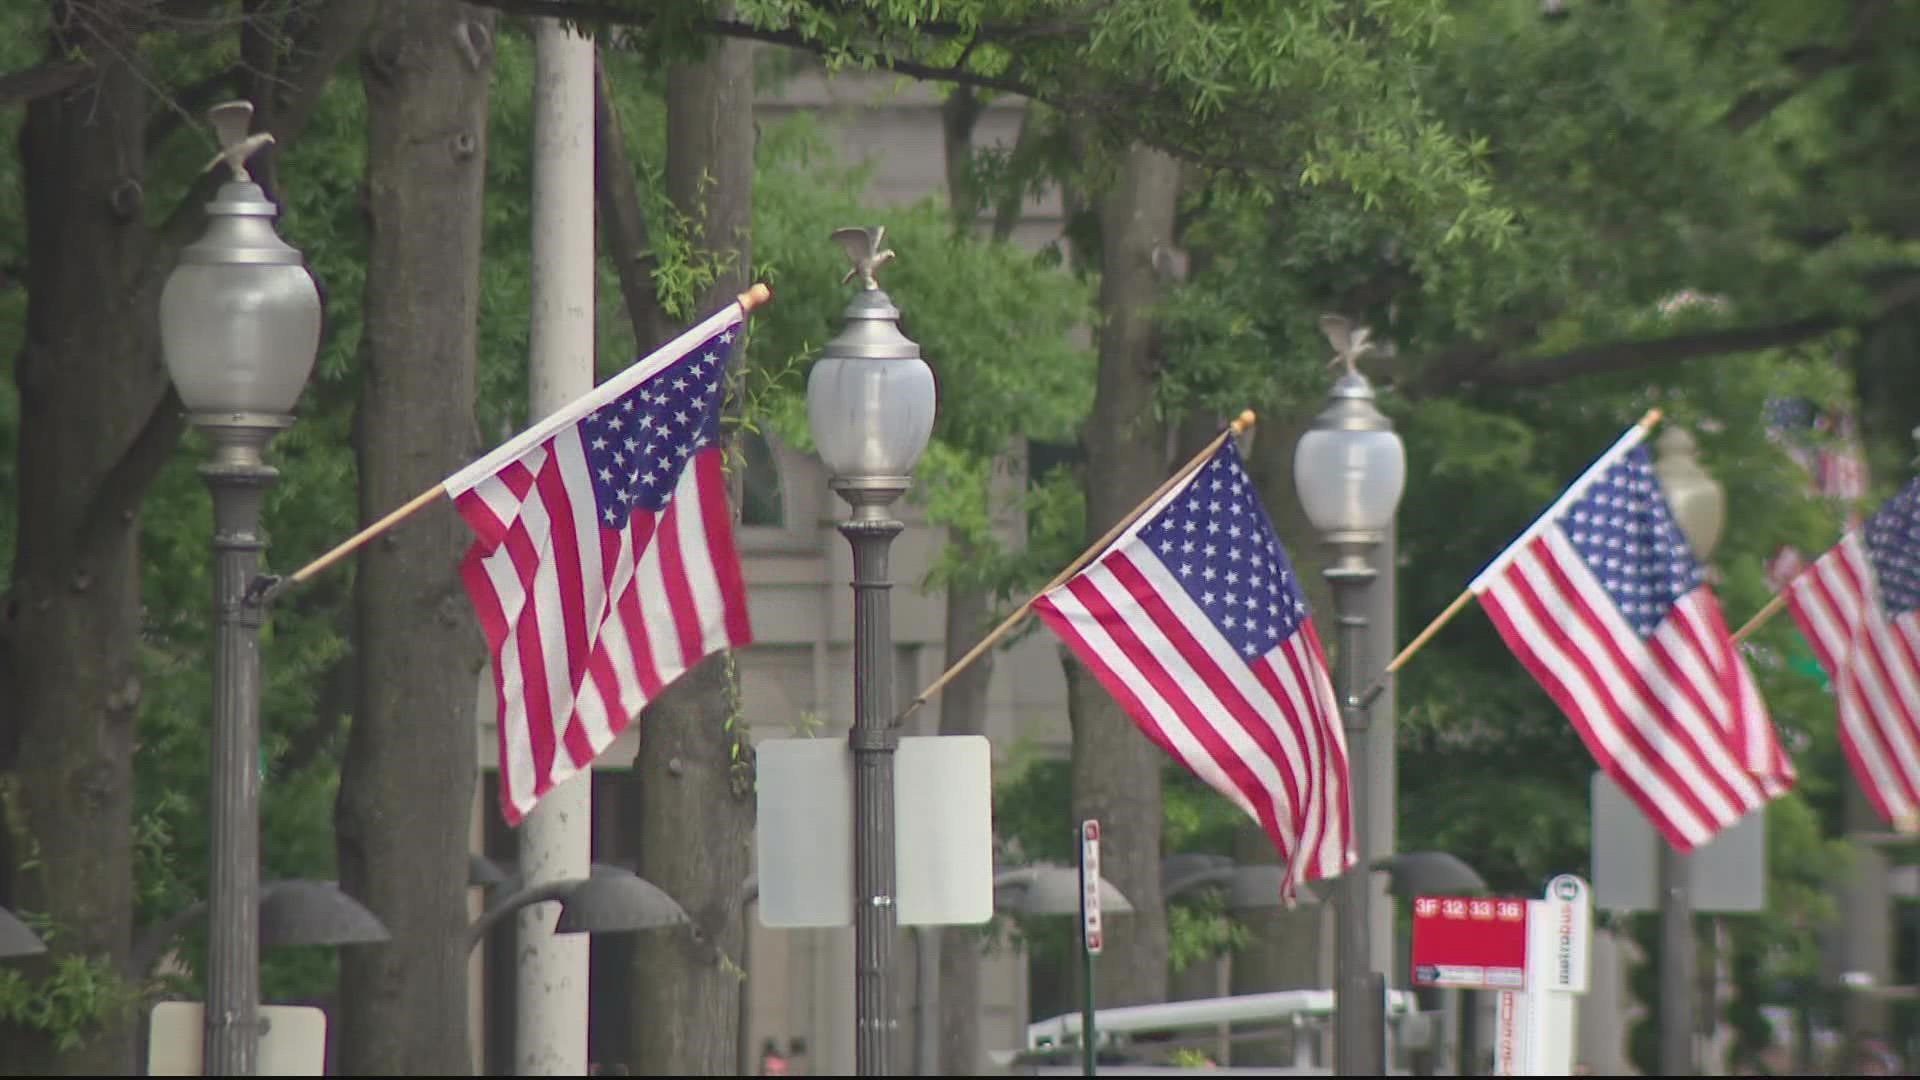 All of the flags have 51 stars on them in support of D.C. statehood.